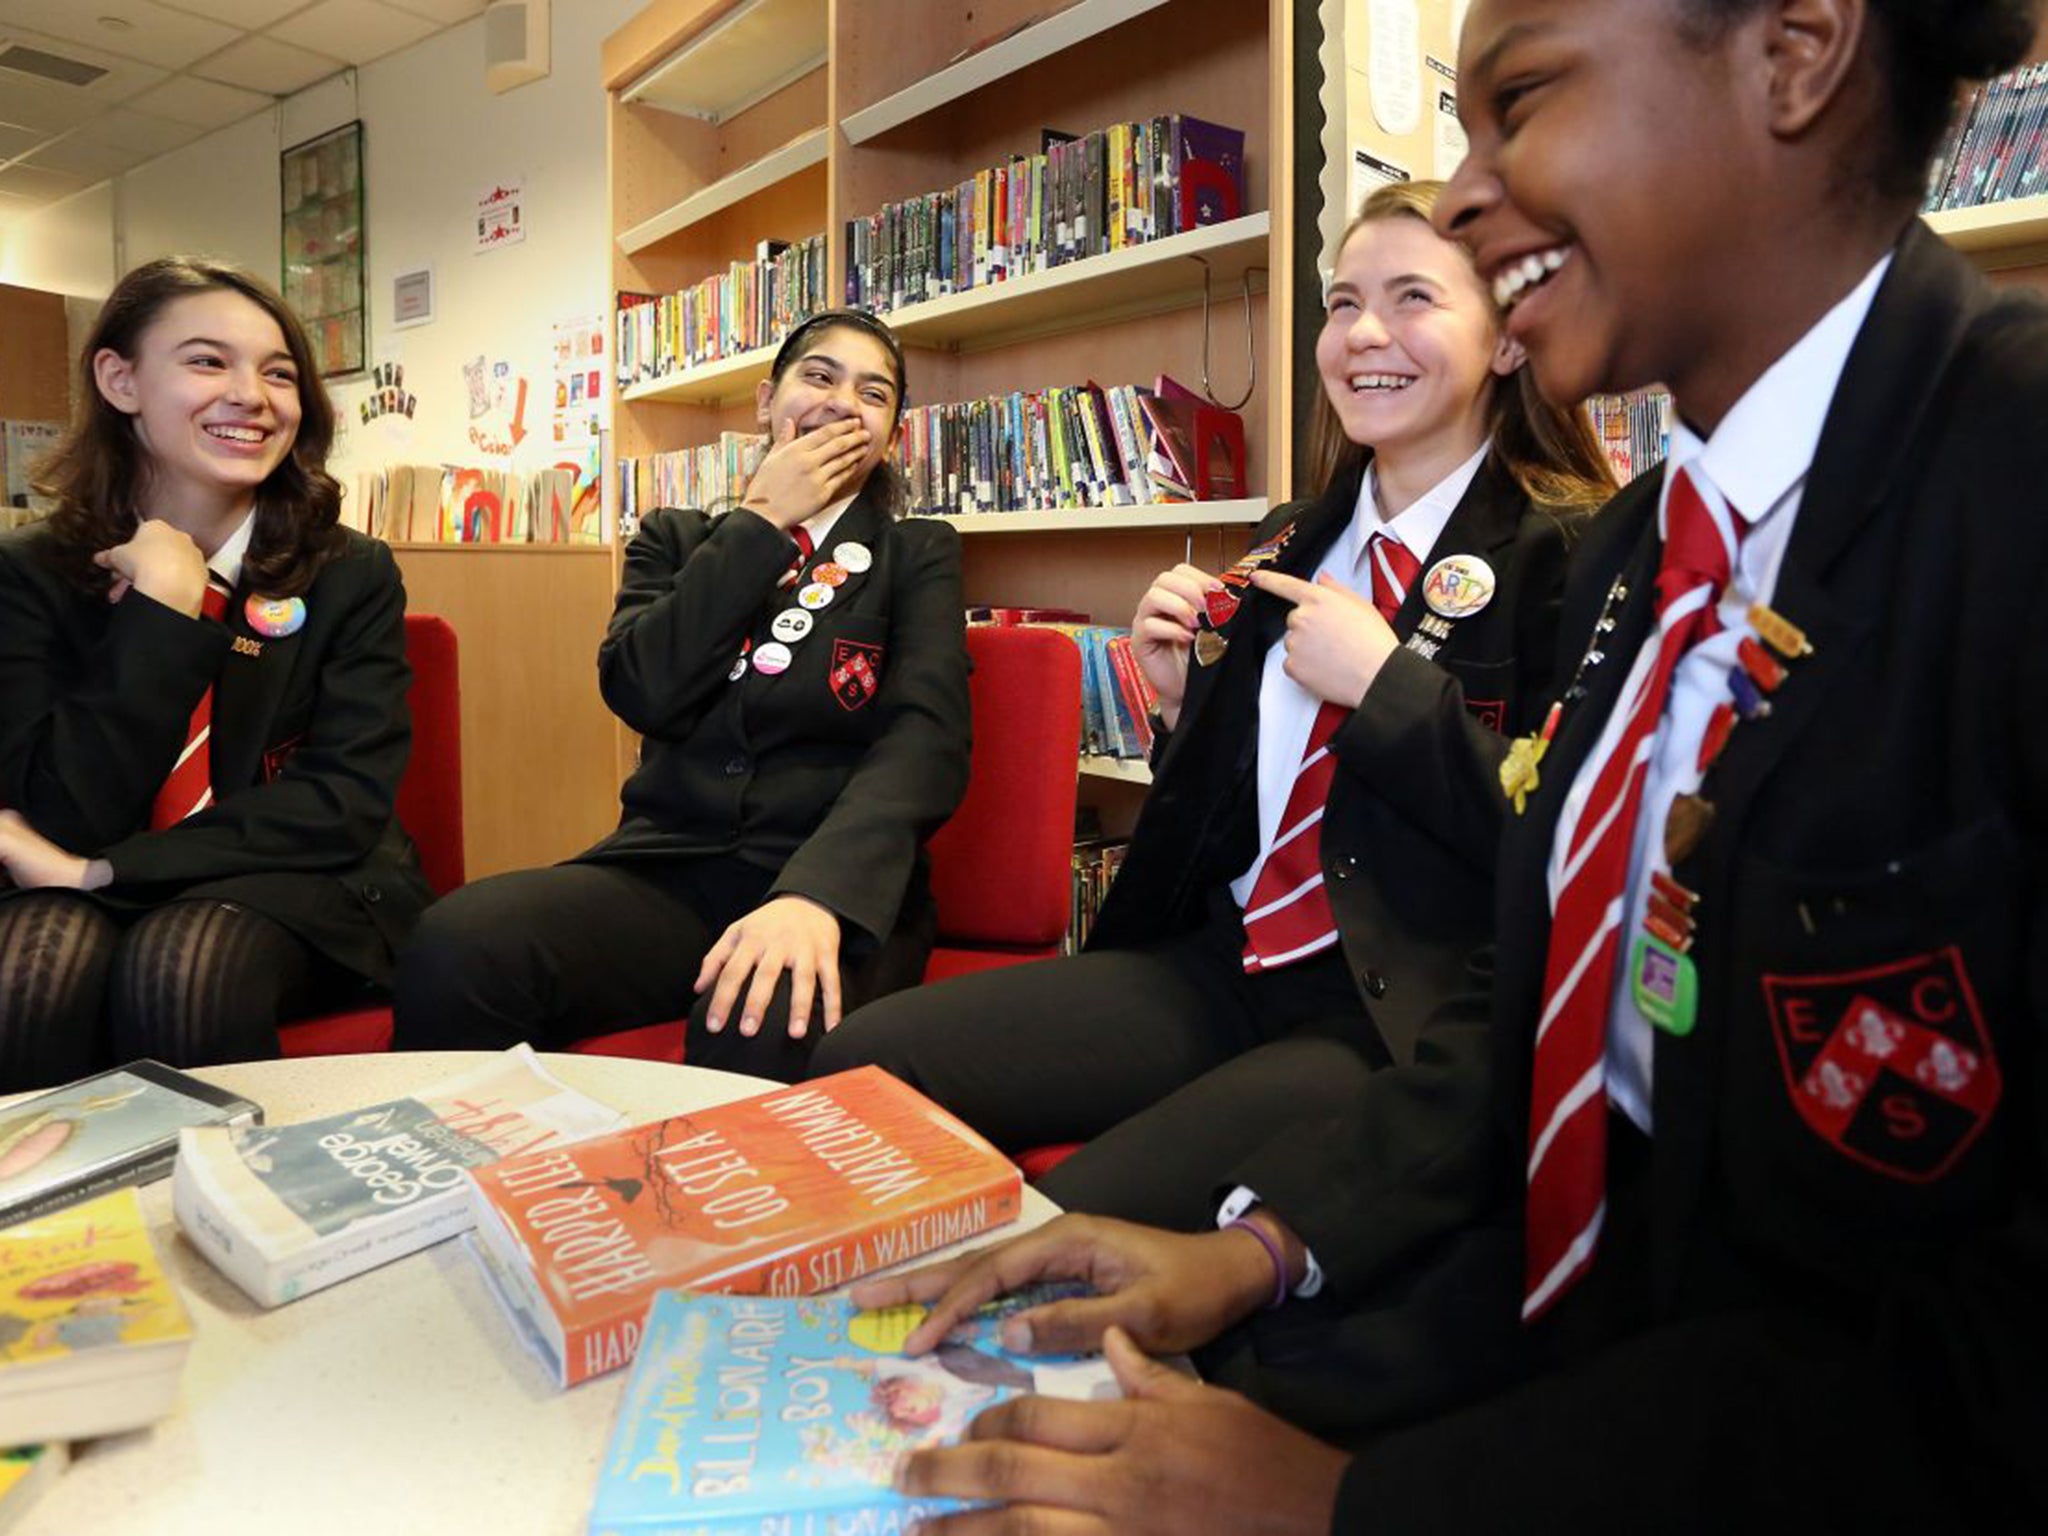 Year 9 mediators trained to settle disputes, in the library at Eastbury school